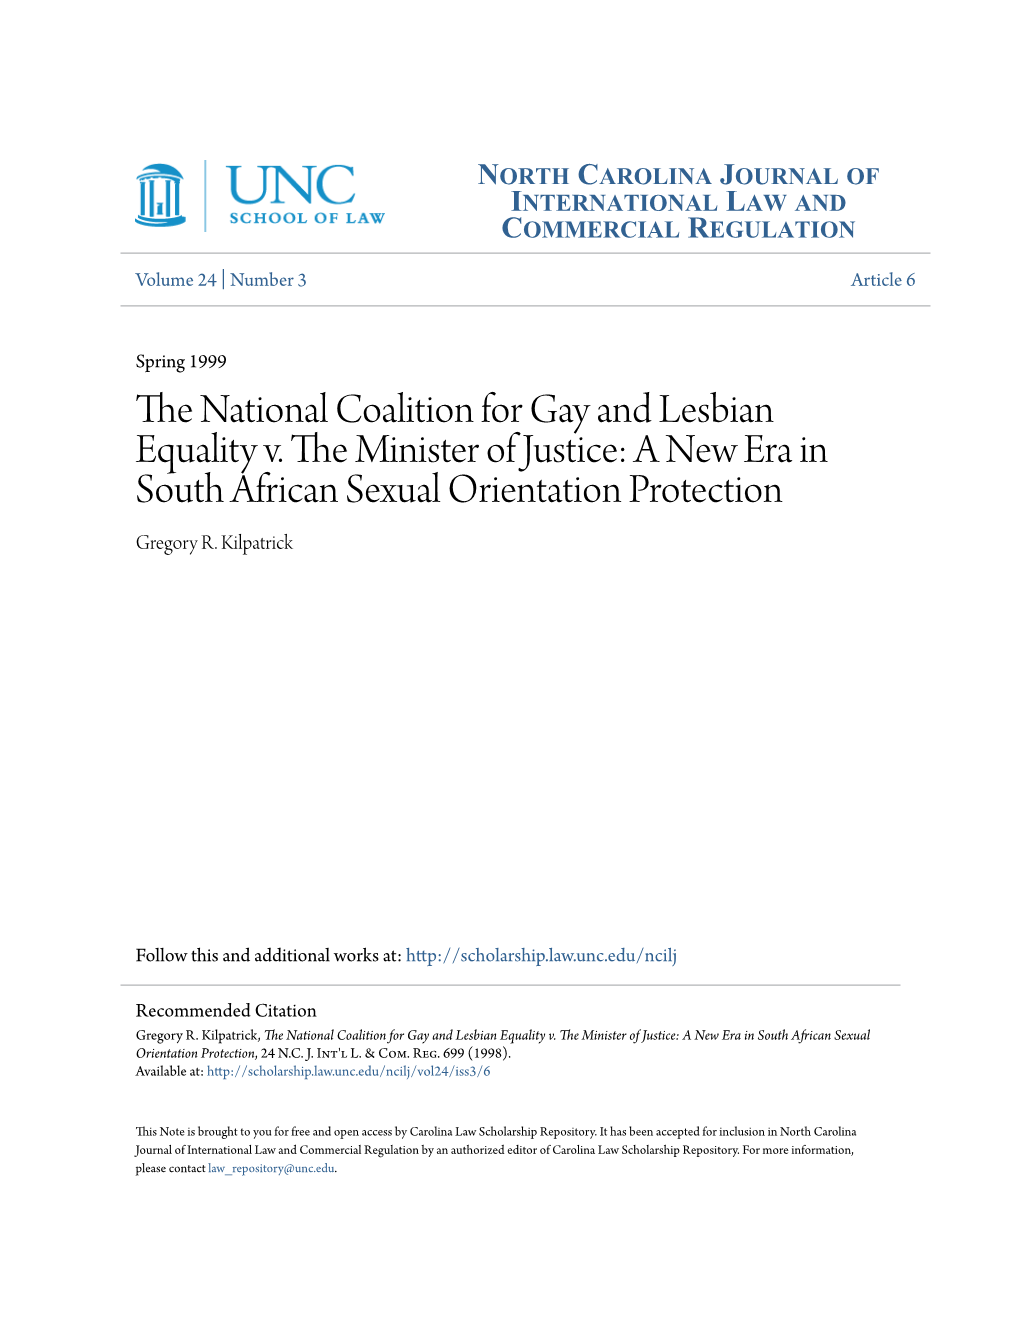 The National Coalition for Gay and Lesbian Equality V. the Minister of Justice: a New Era in South African Sexual Orientation Protection, 24 N.C